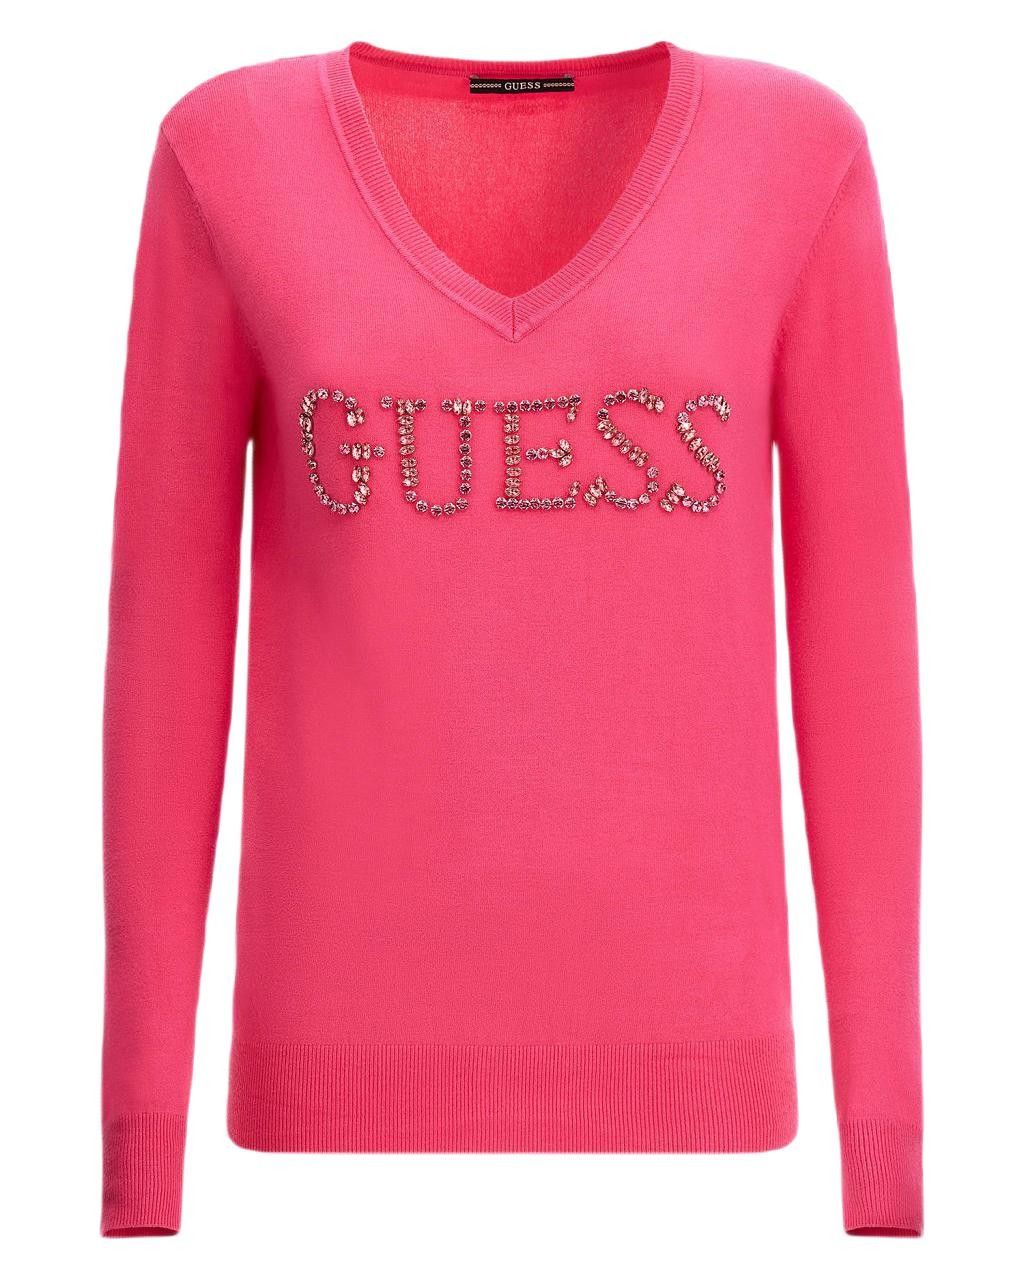 Brand: Guess
Gender: Women
Type: Knitwear
Season: Spring/Summer

PRODUCT DETAIL
• Color: pink
• Pattern: print
• Fastening: slip on
• Sleeves: long
• Neckline: round neck

COMPOSITION AND MATERIAL
• Composition: -2% elastane -6% polyamide -82% viscose 
•  Washing: machine wash at 30°